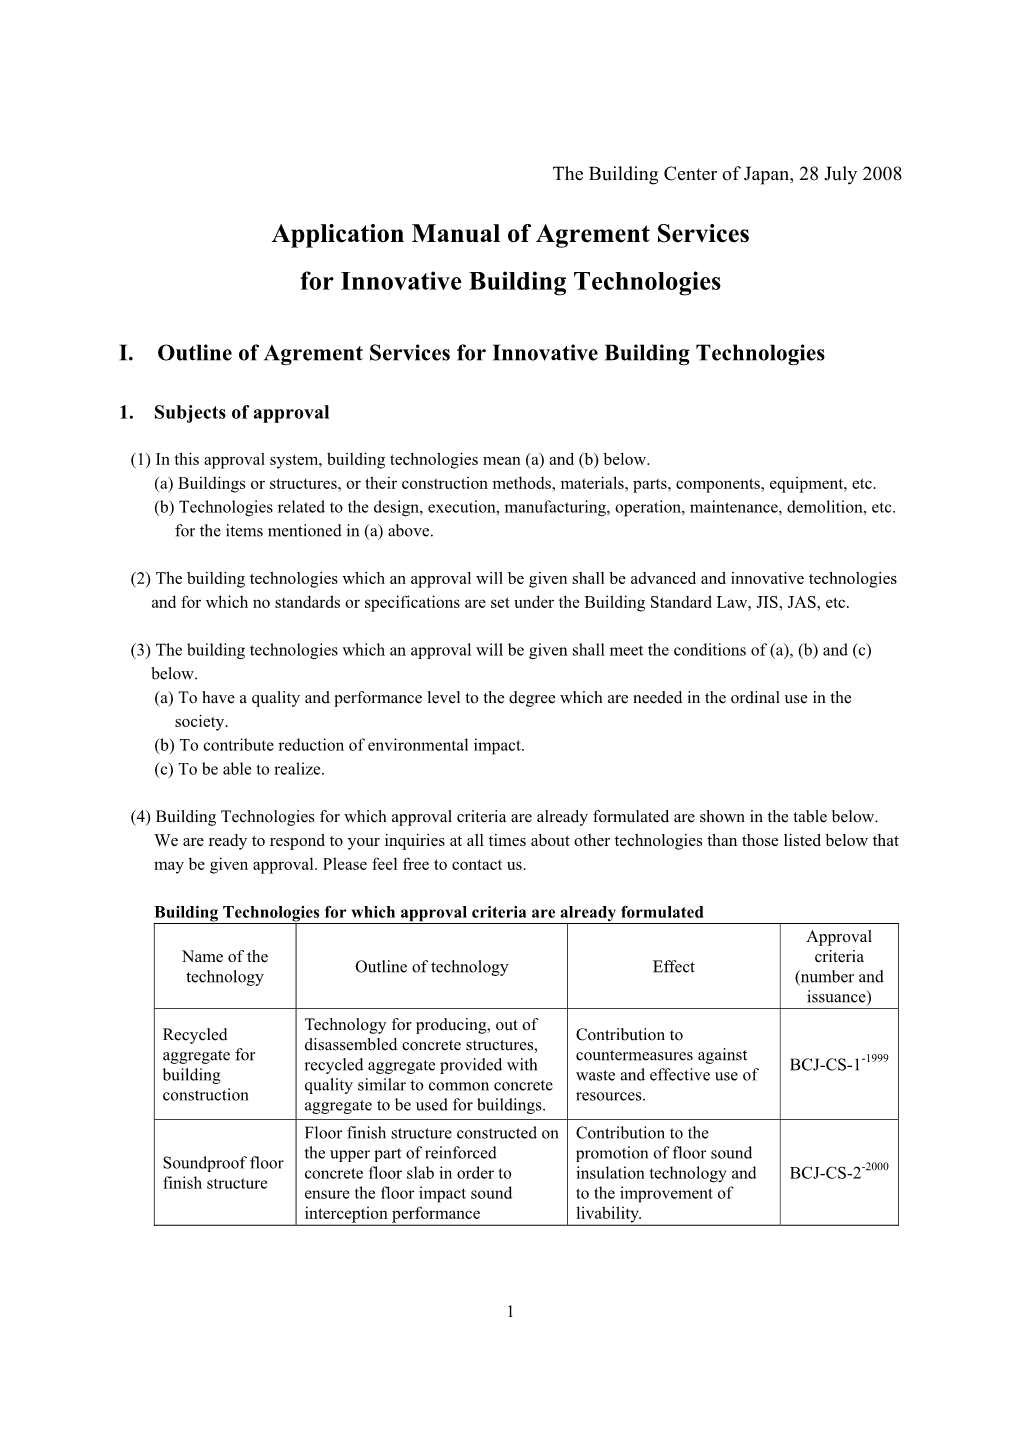 Application Manual of Agrement Services for Innovative Building Technologies